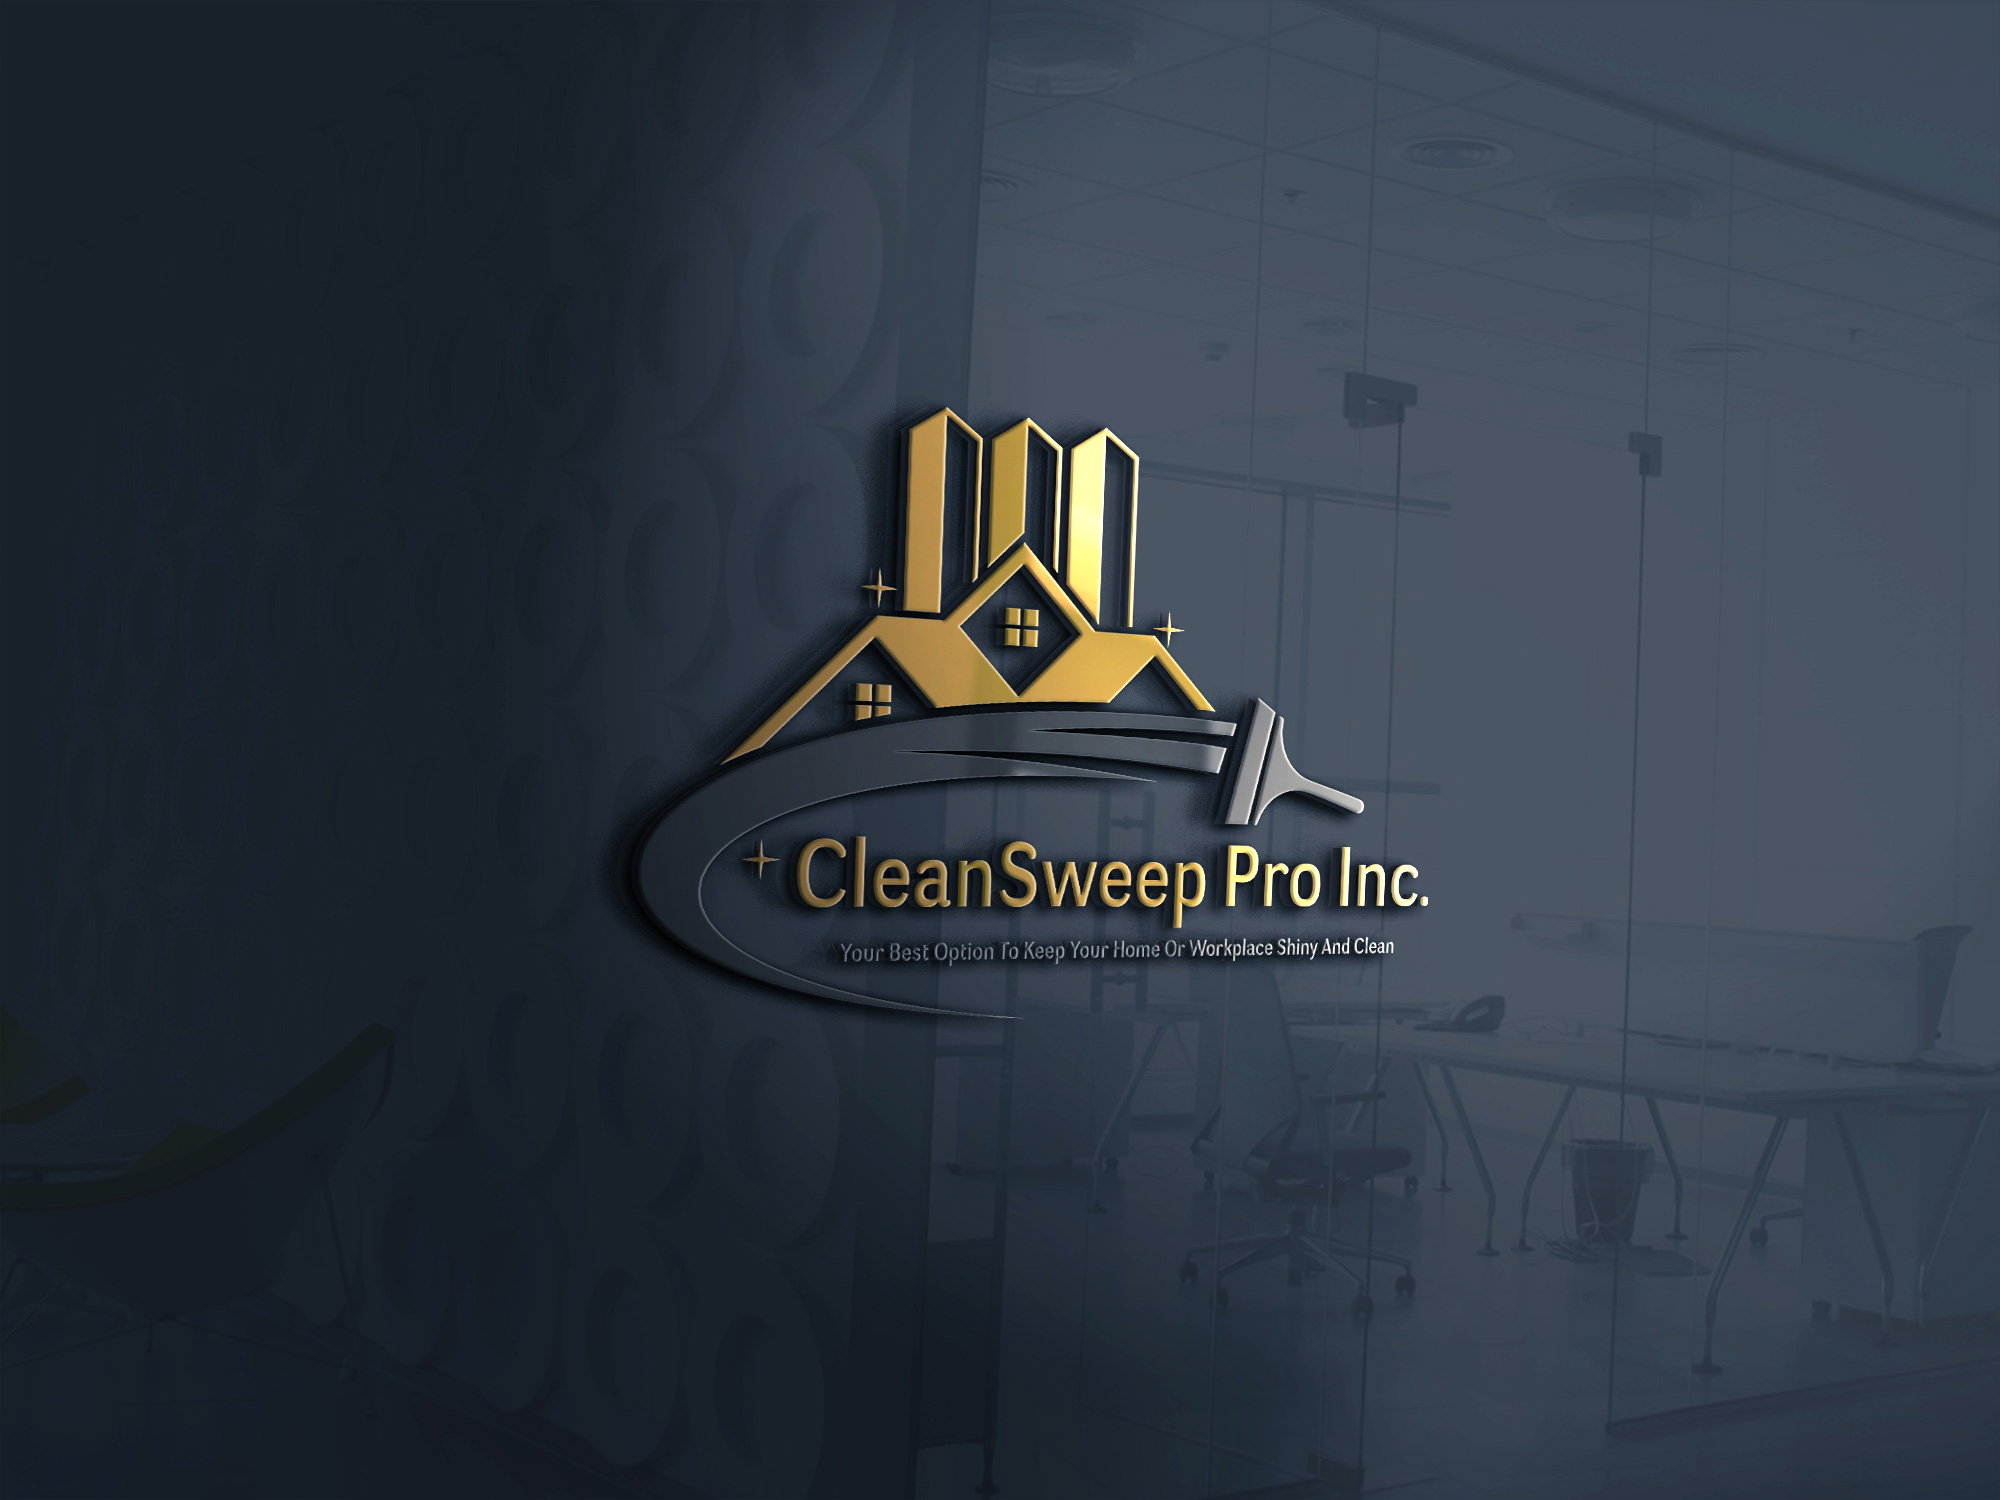 Cleansweep Pro, Inc. Logo